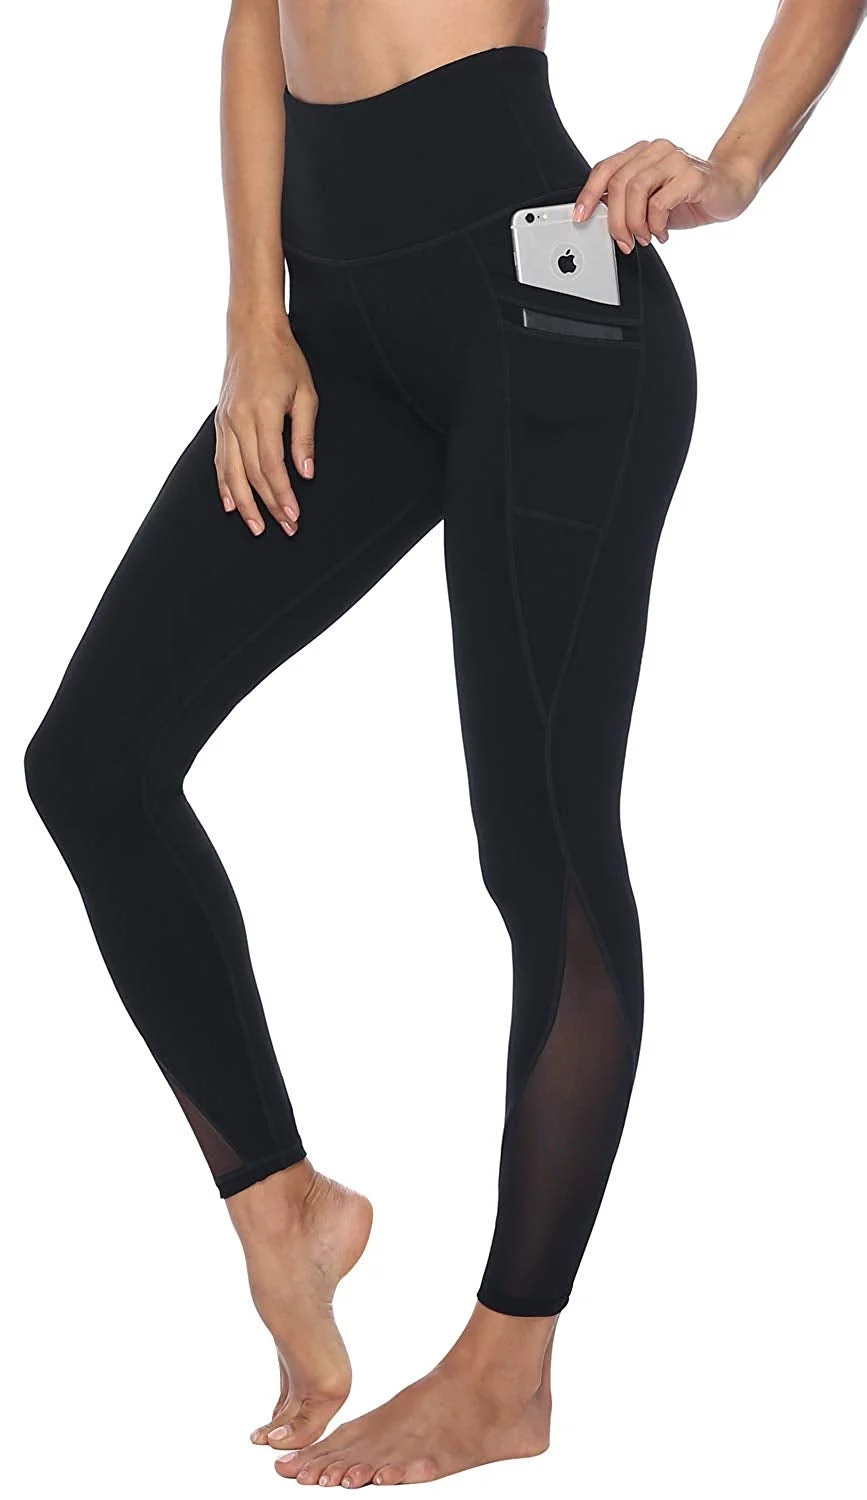 Women's Mesh Yoga Pants with 2 Pockets, Non See-Through Stretch Leggings